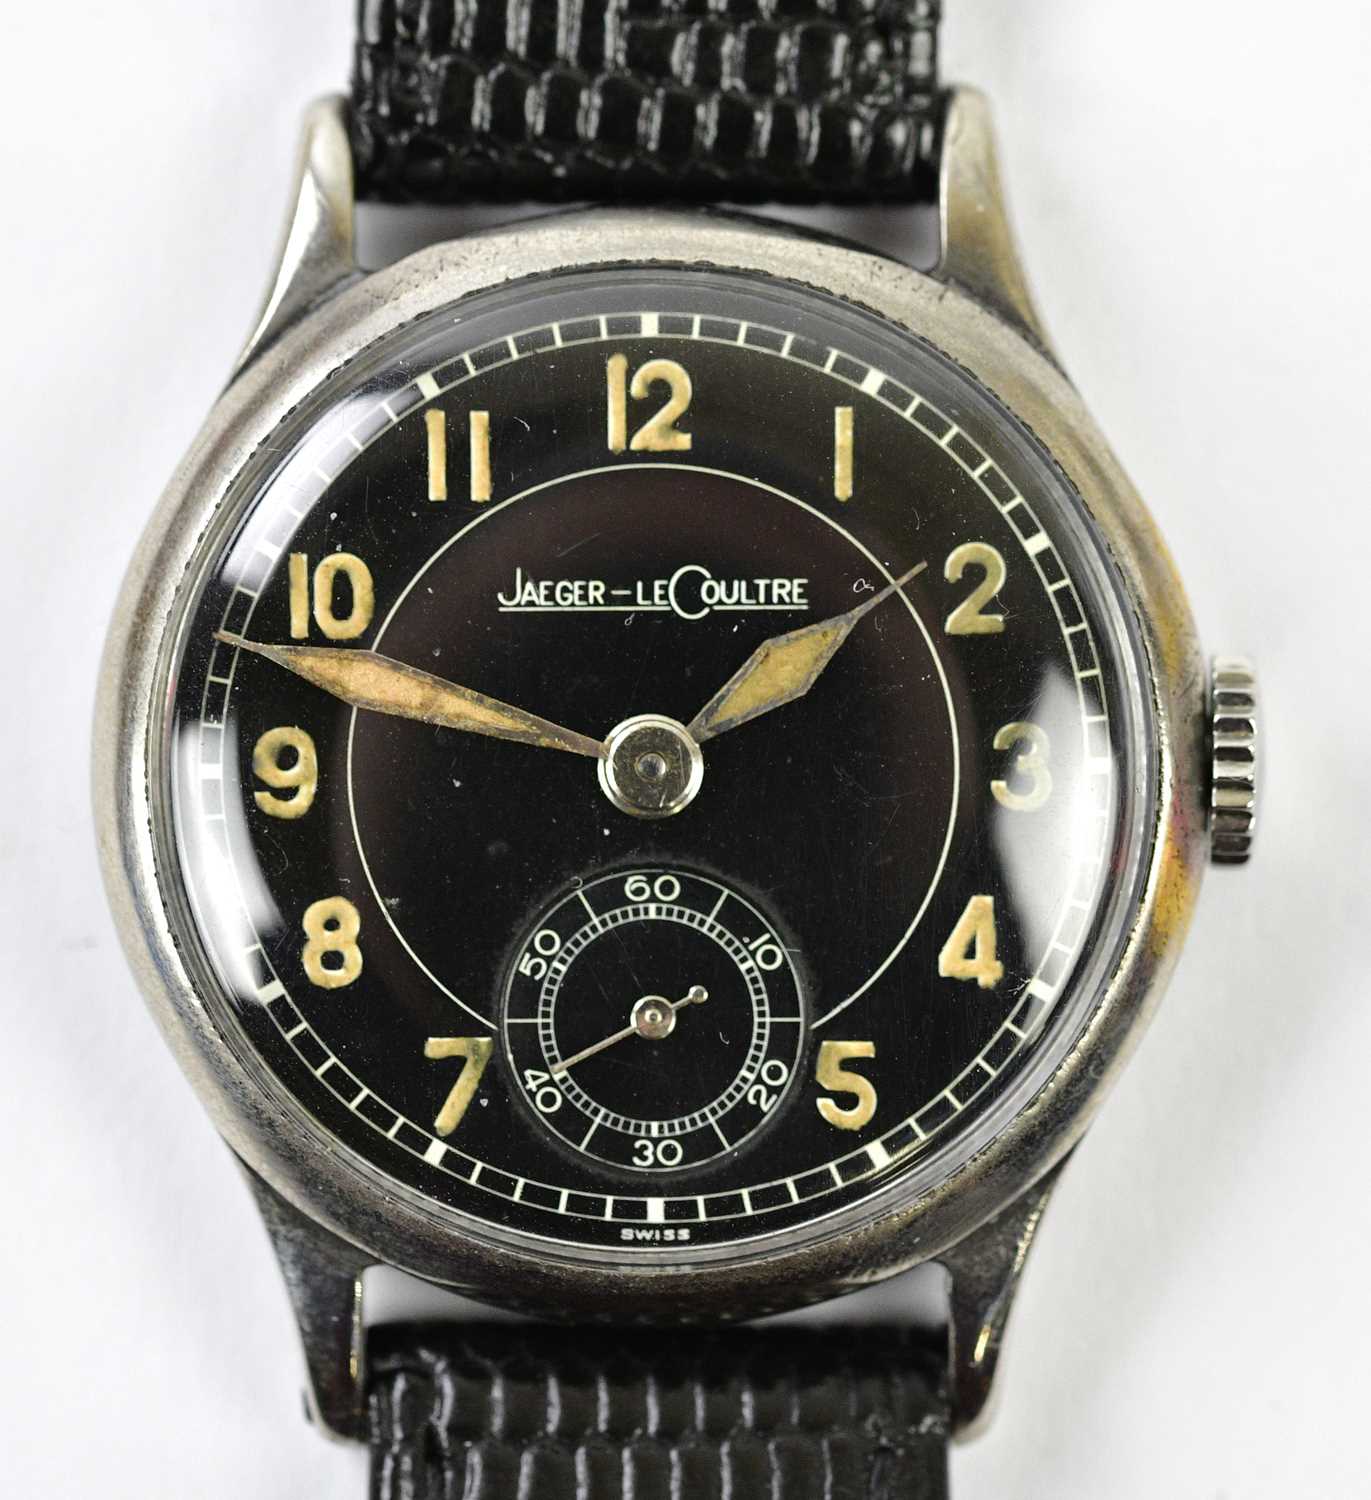 JAEGER-LECOULTRE; a circa 1940 military style black face stainless steel wristwatch with